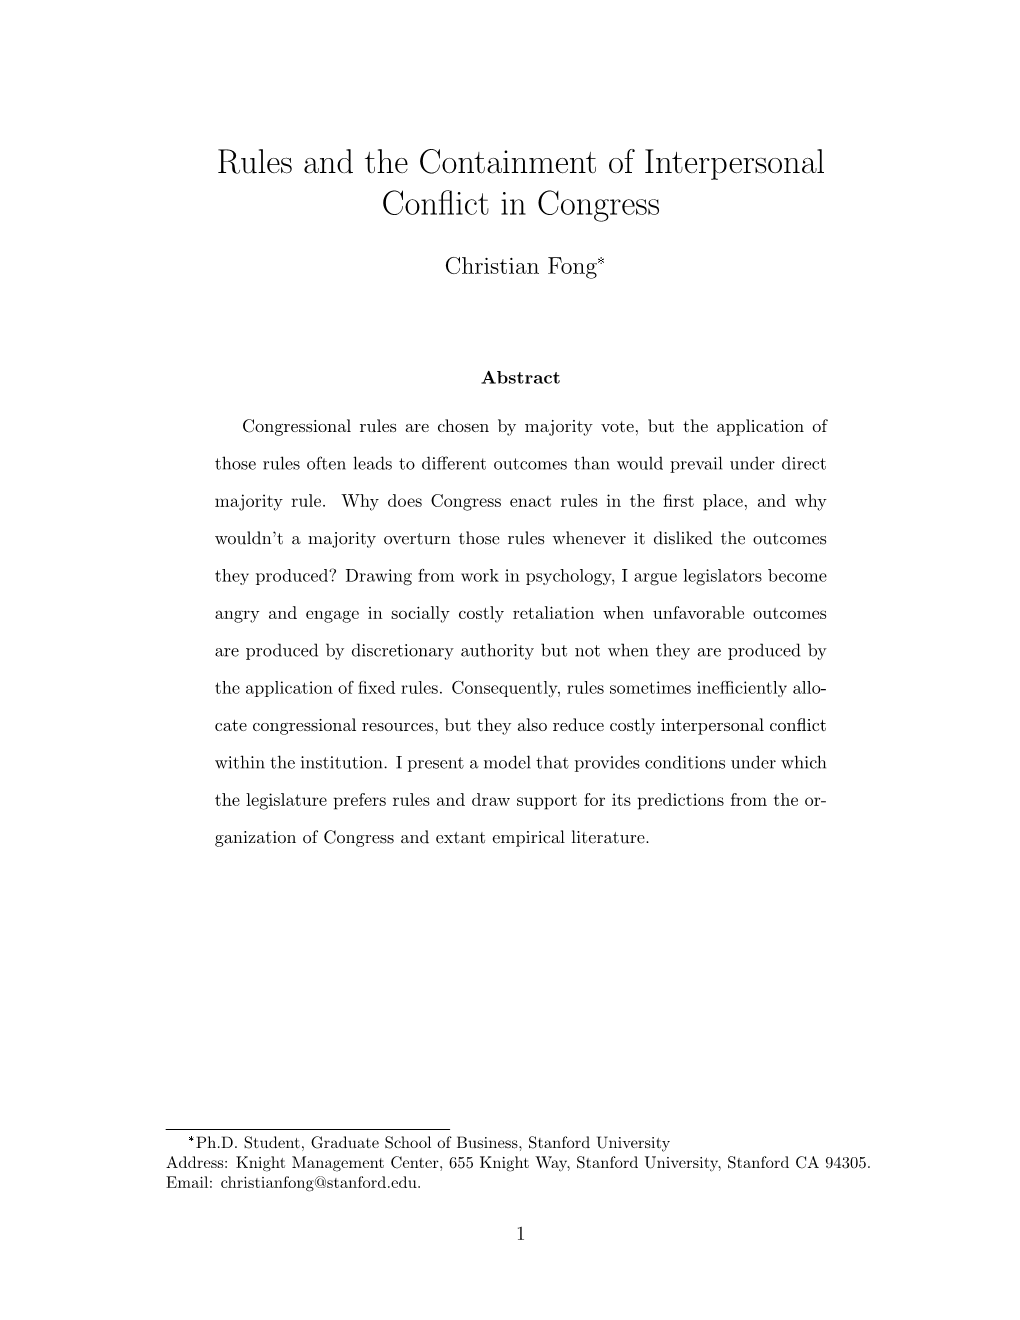 Rules and the Containment of Interpersonal Conflict in Congress